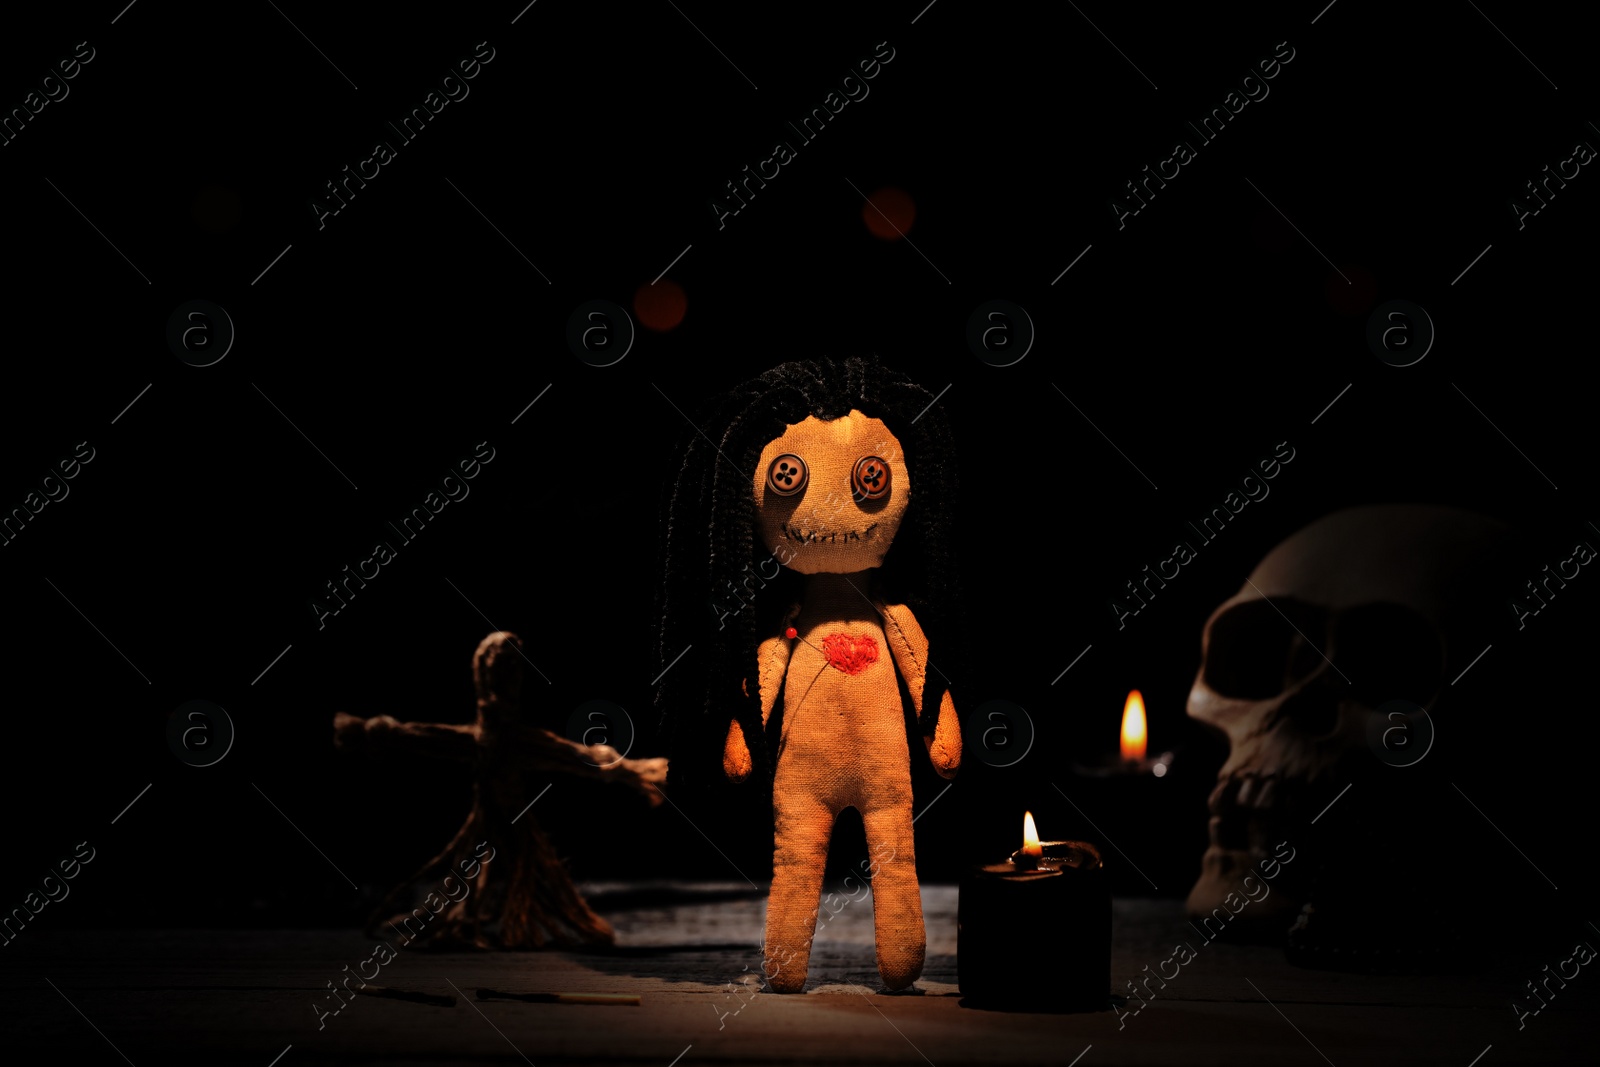 Image of Female voodoo doll with pin in heart and ceremonial items on table in darkness